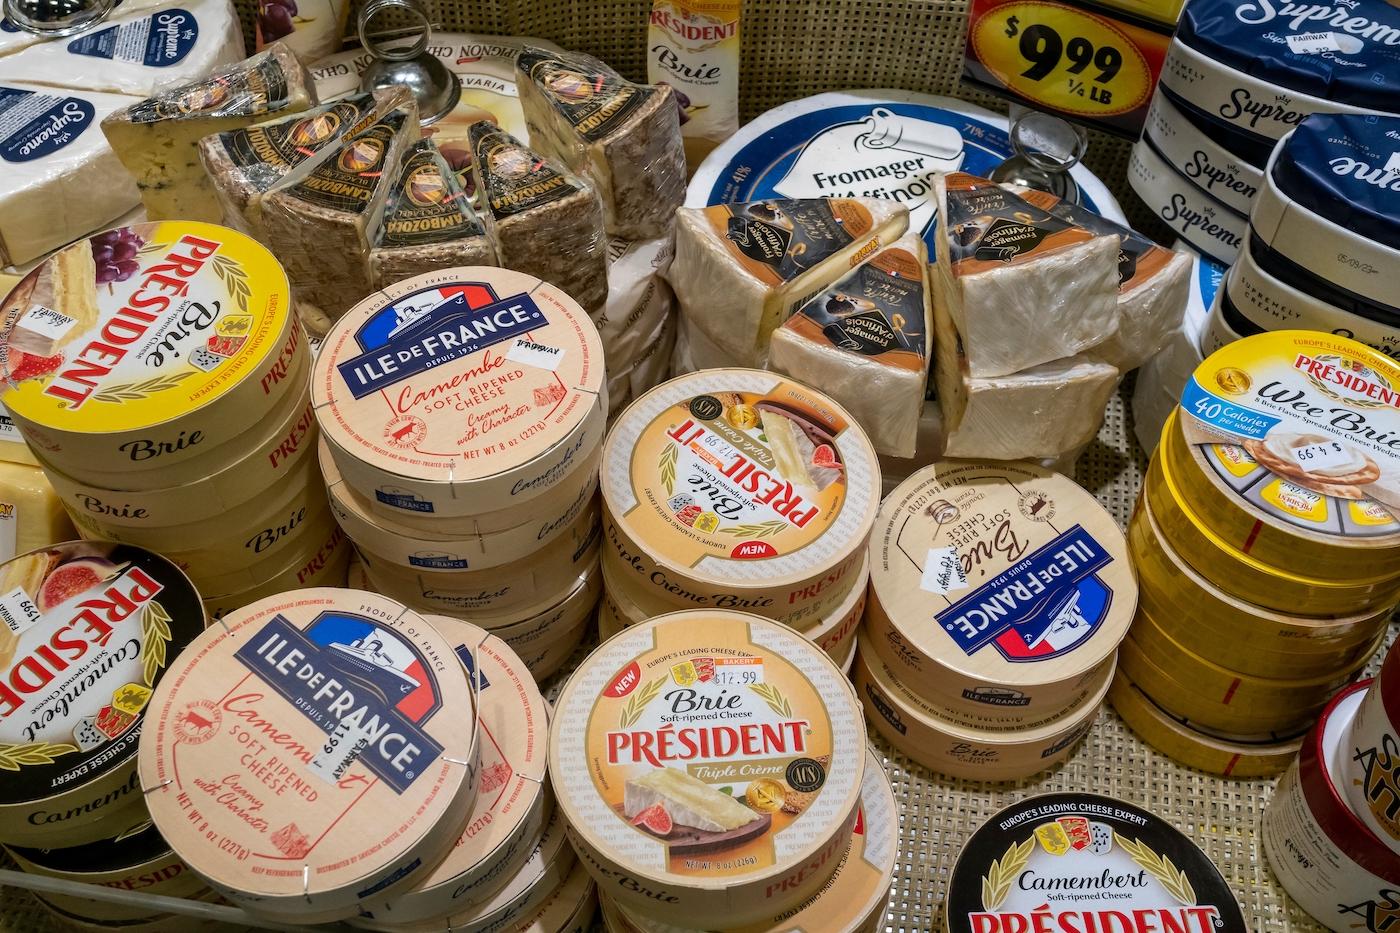 Wheels of brie cheese in a supermarket display